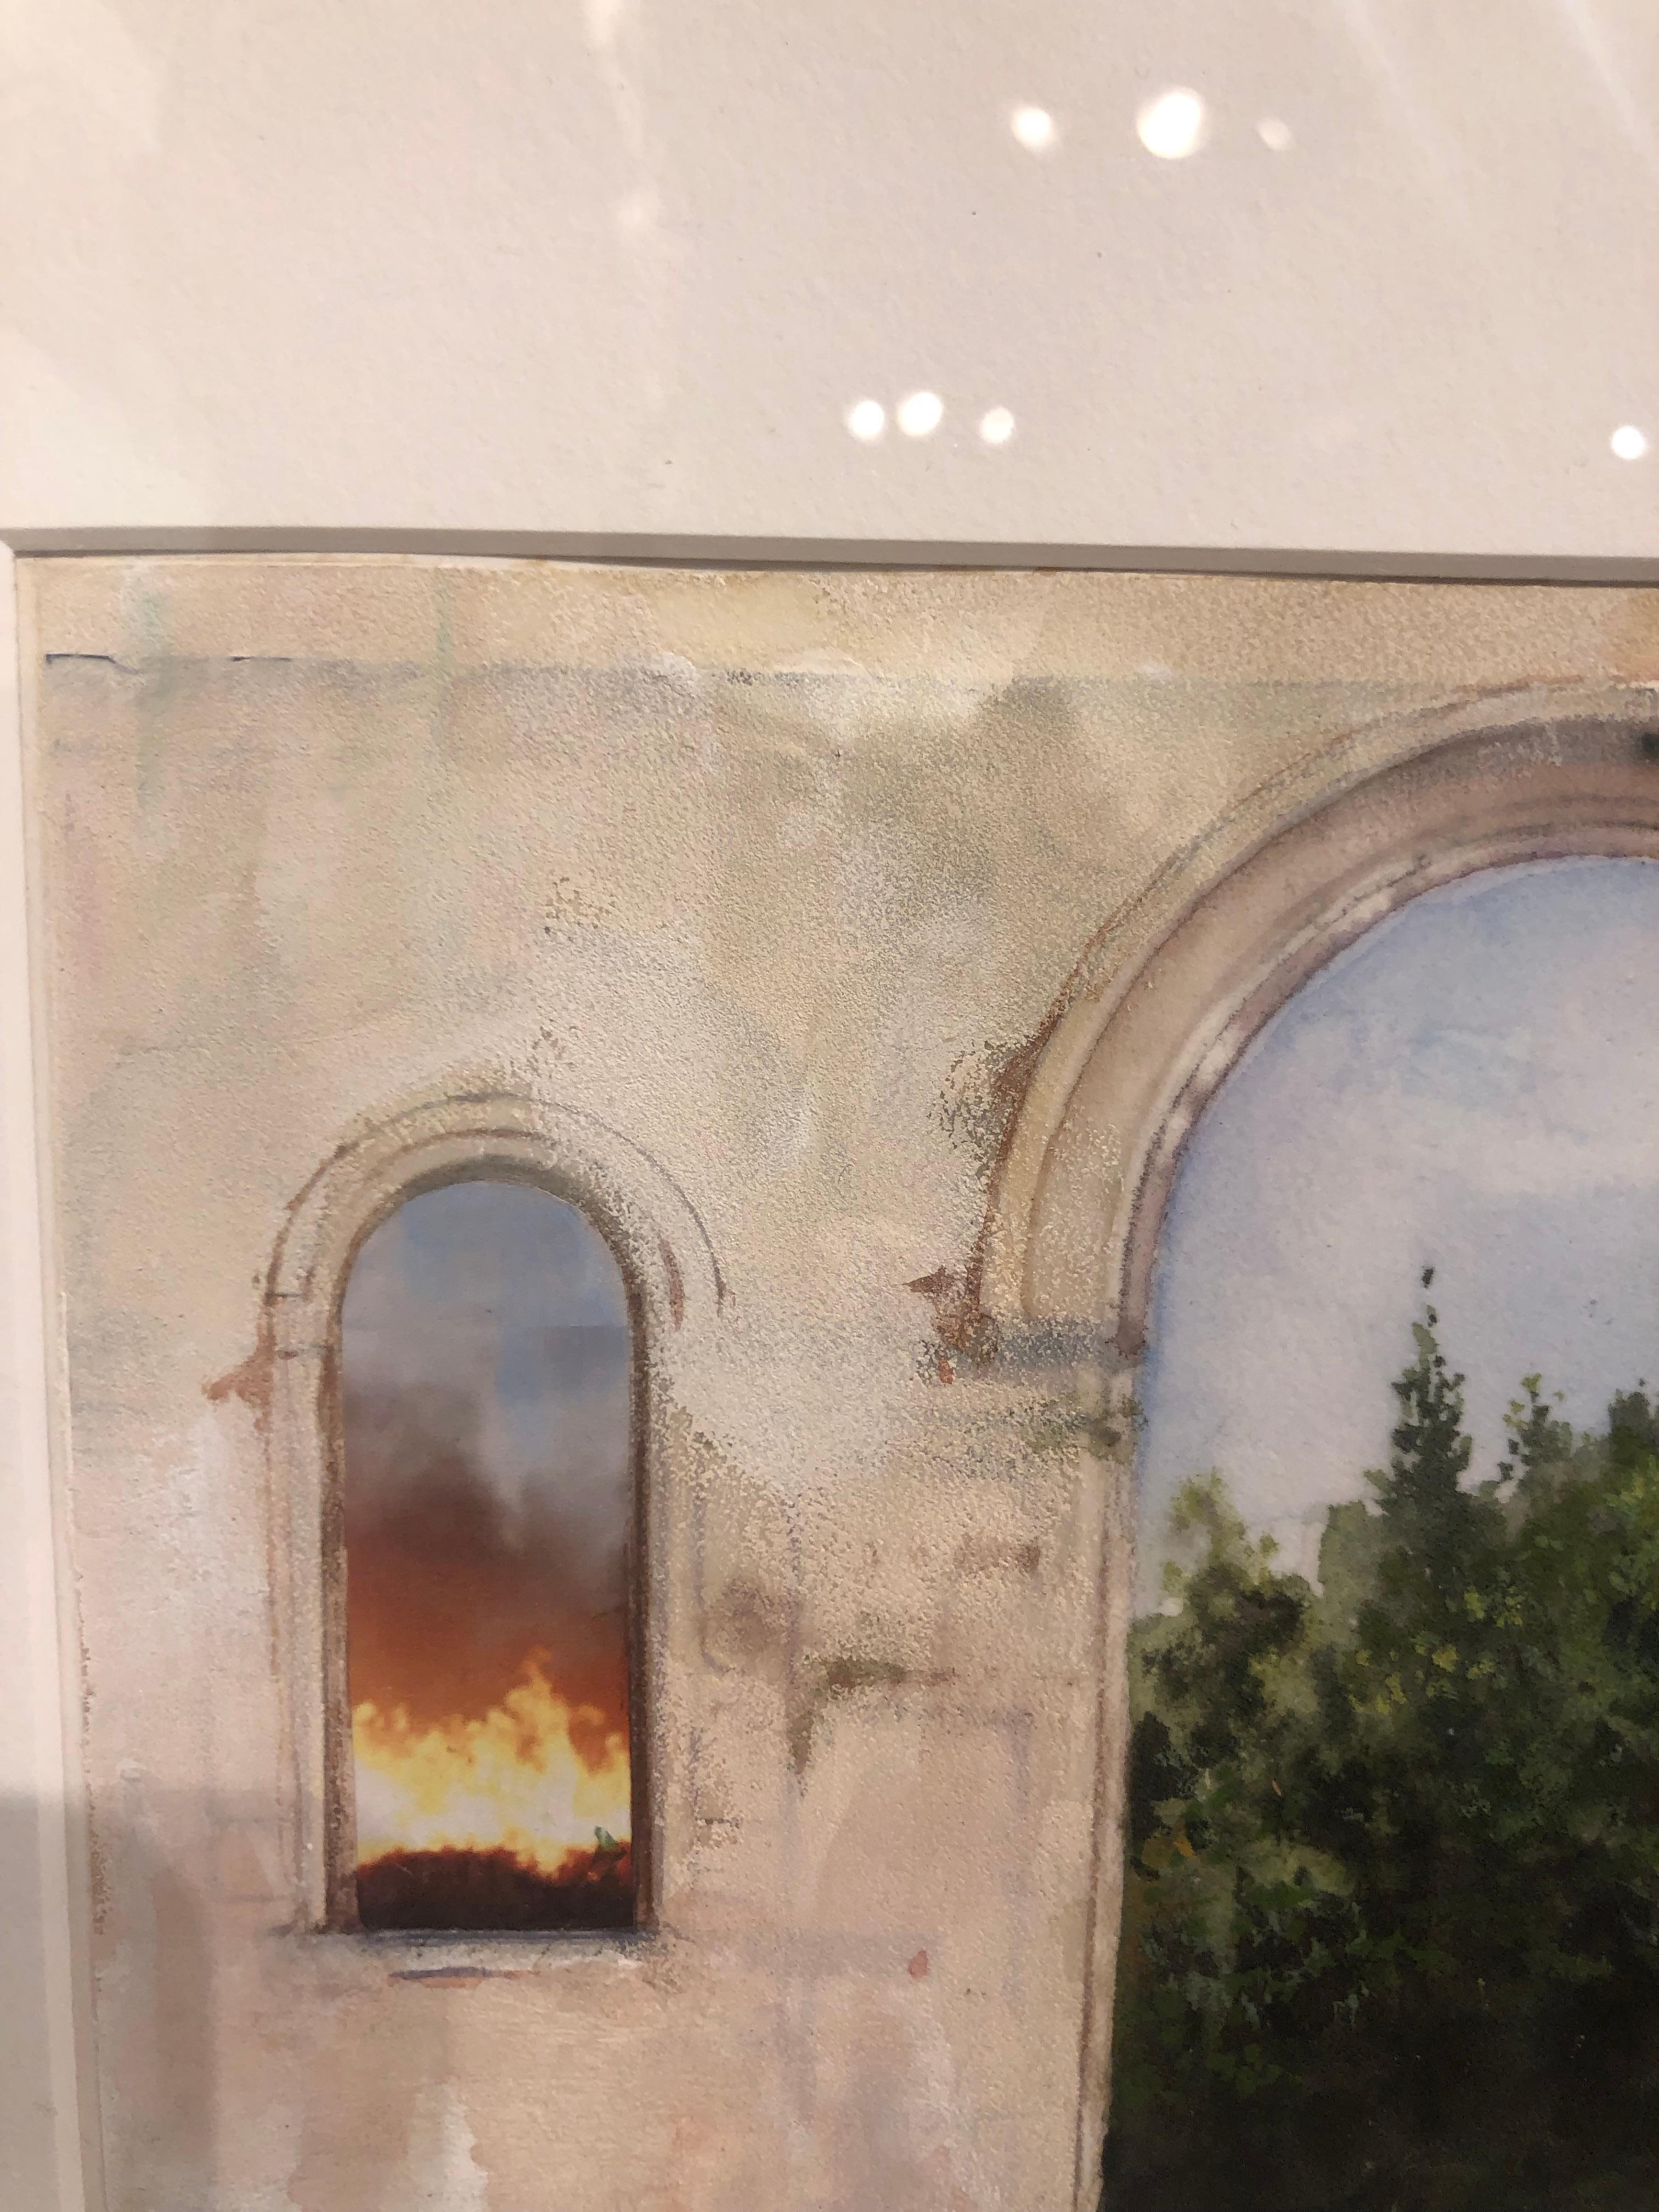 Arched Inferno - Architectural Study with Landscape, Collaged and Painted - Gray Landscape Painting by Carol Pylant